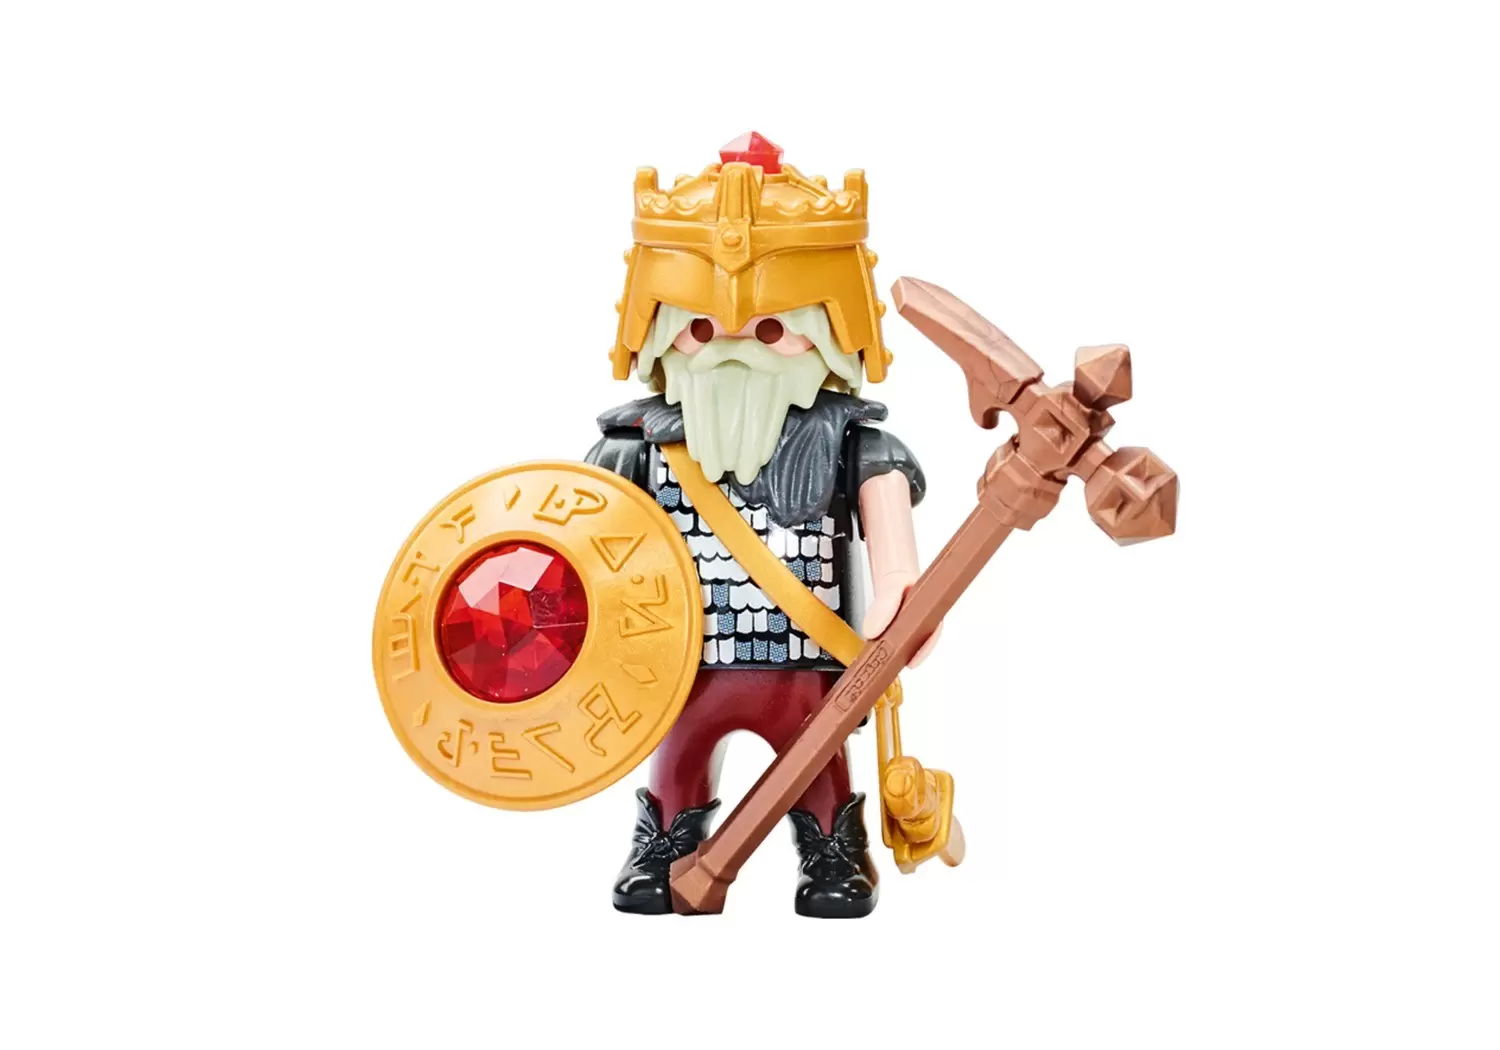 Playmobil Middle-Ages - Leader of the dwarf knights